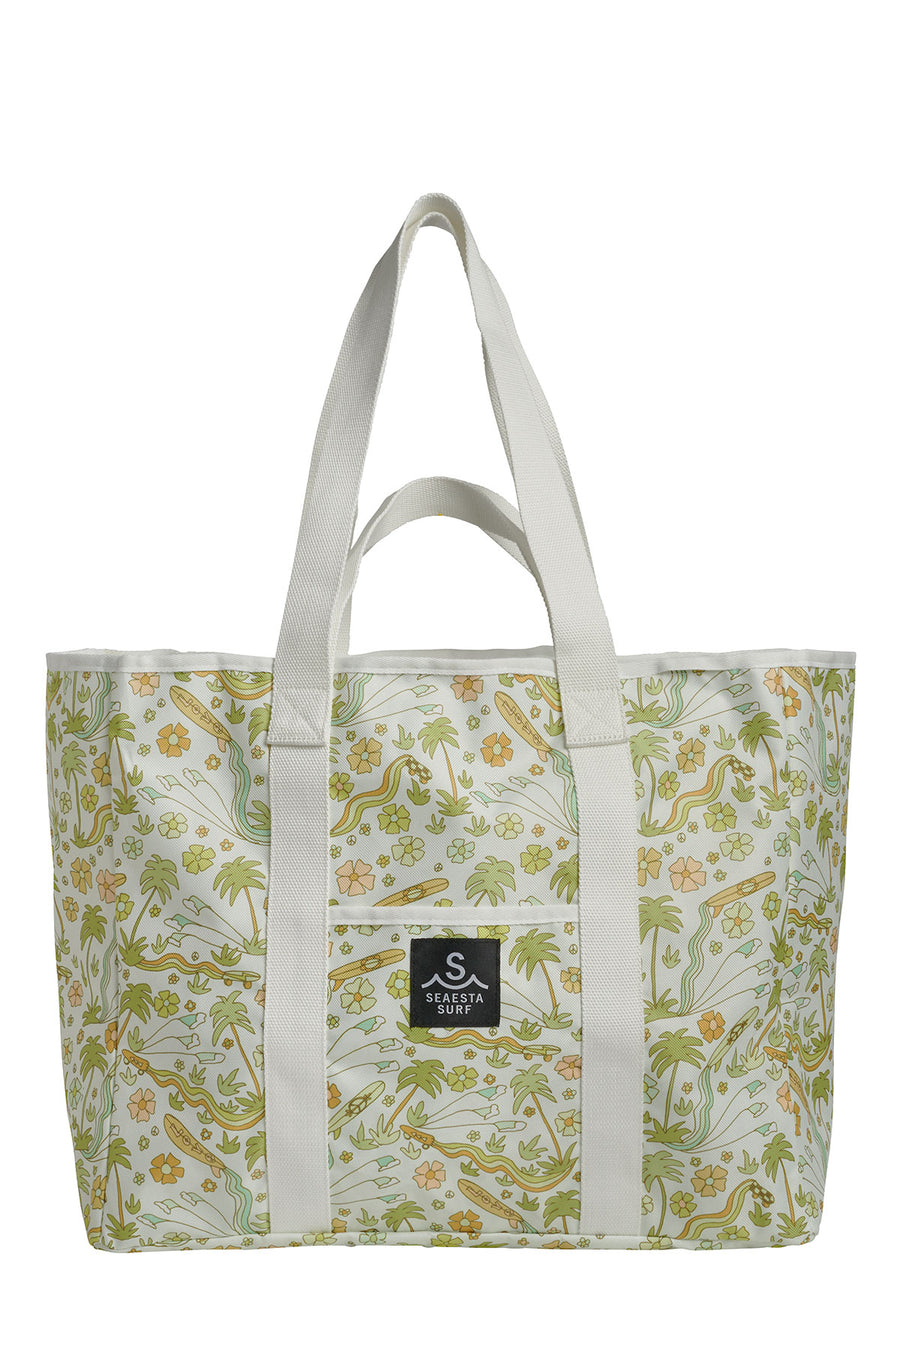 Seaesta Surf x Surfy Birdy Recycled Tote Bag / Beach Menagerie